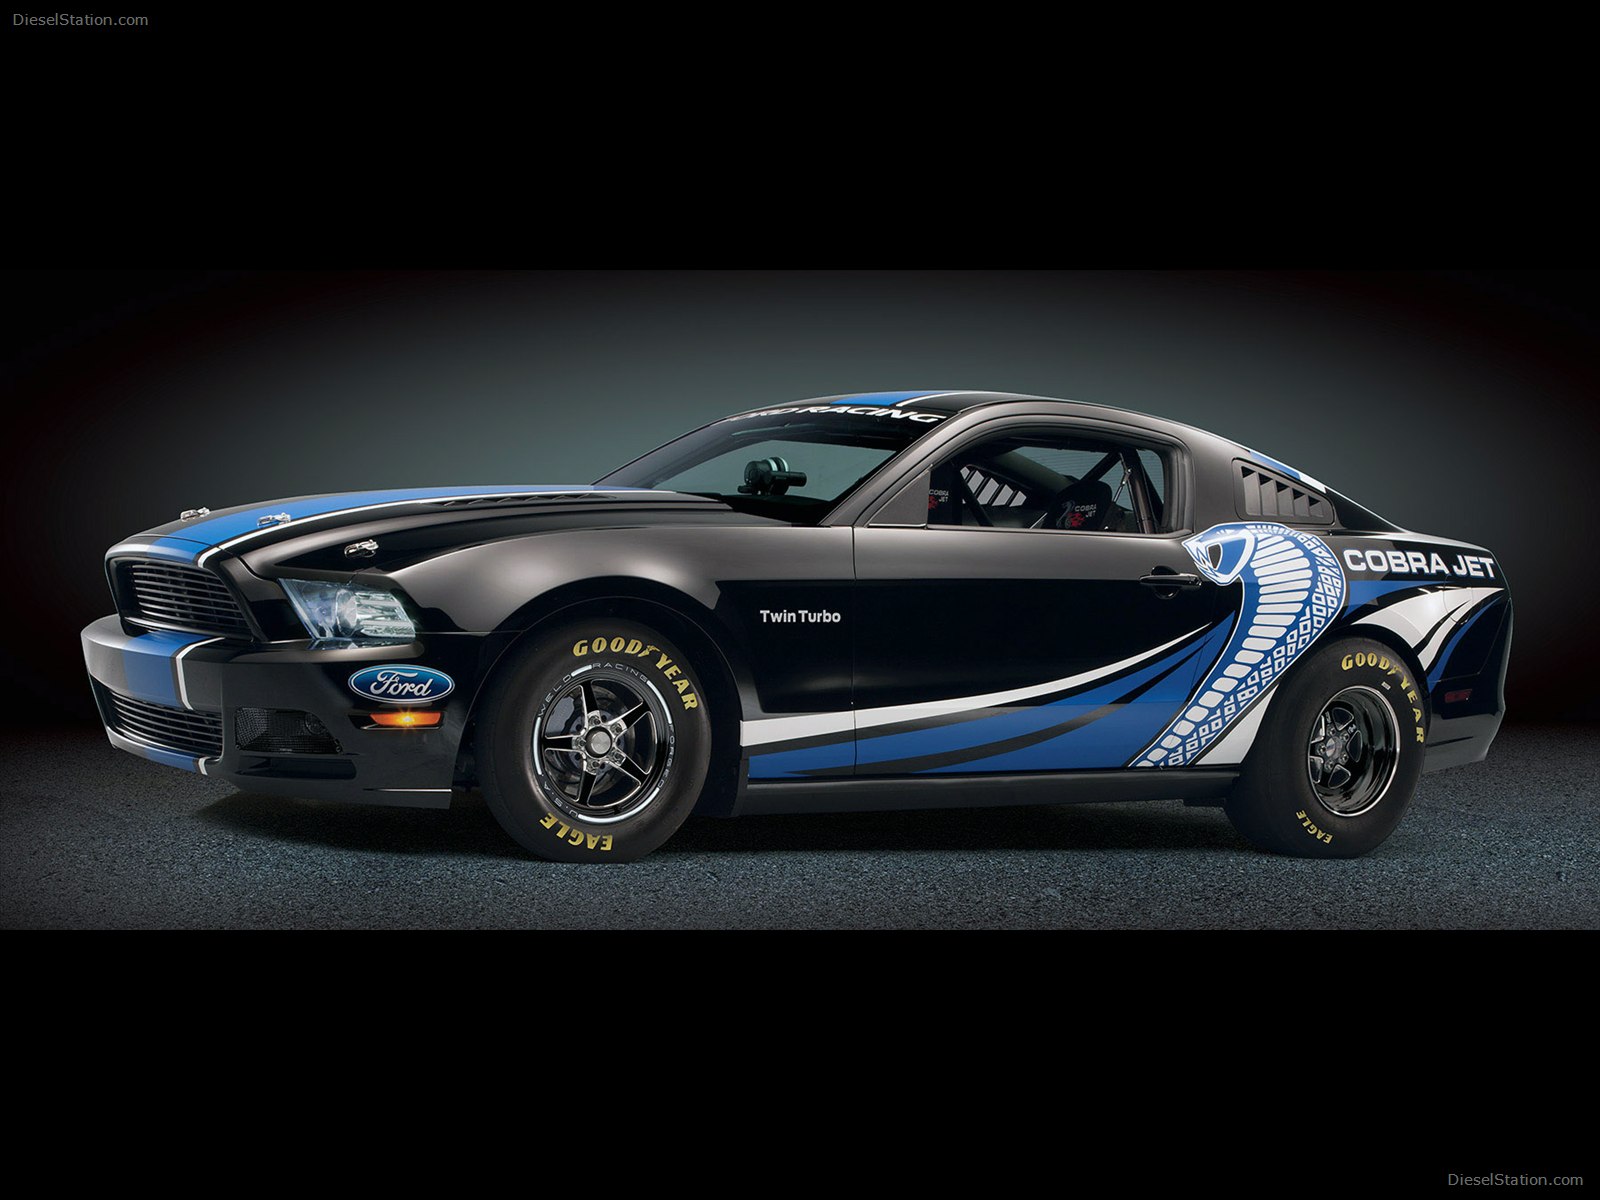 Ford Mustang Cobra Jet Twin Turbo Concept Exotic Car Image Of